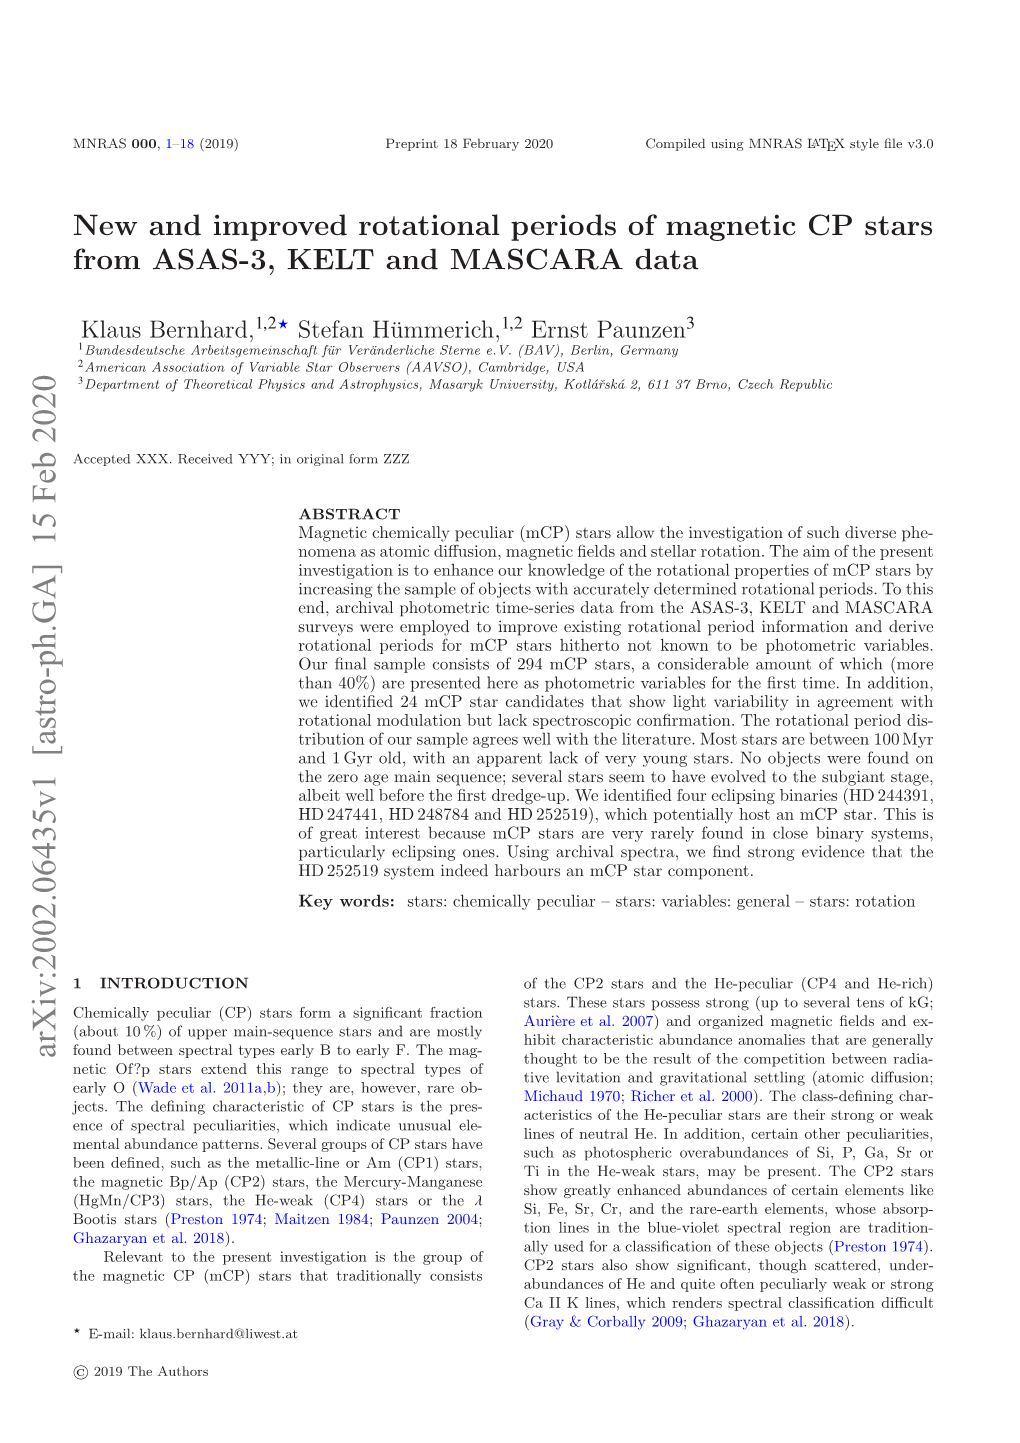 New and Improved Rotational Periods of Magnetic CP Stars from ASAS-3